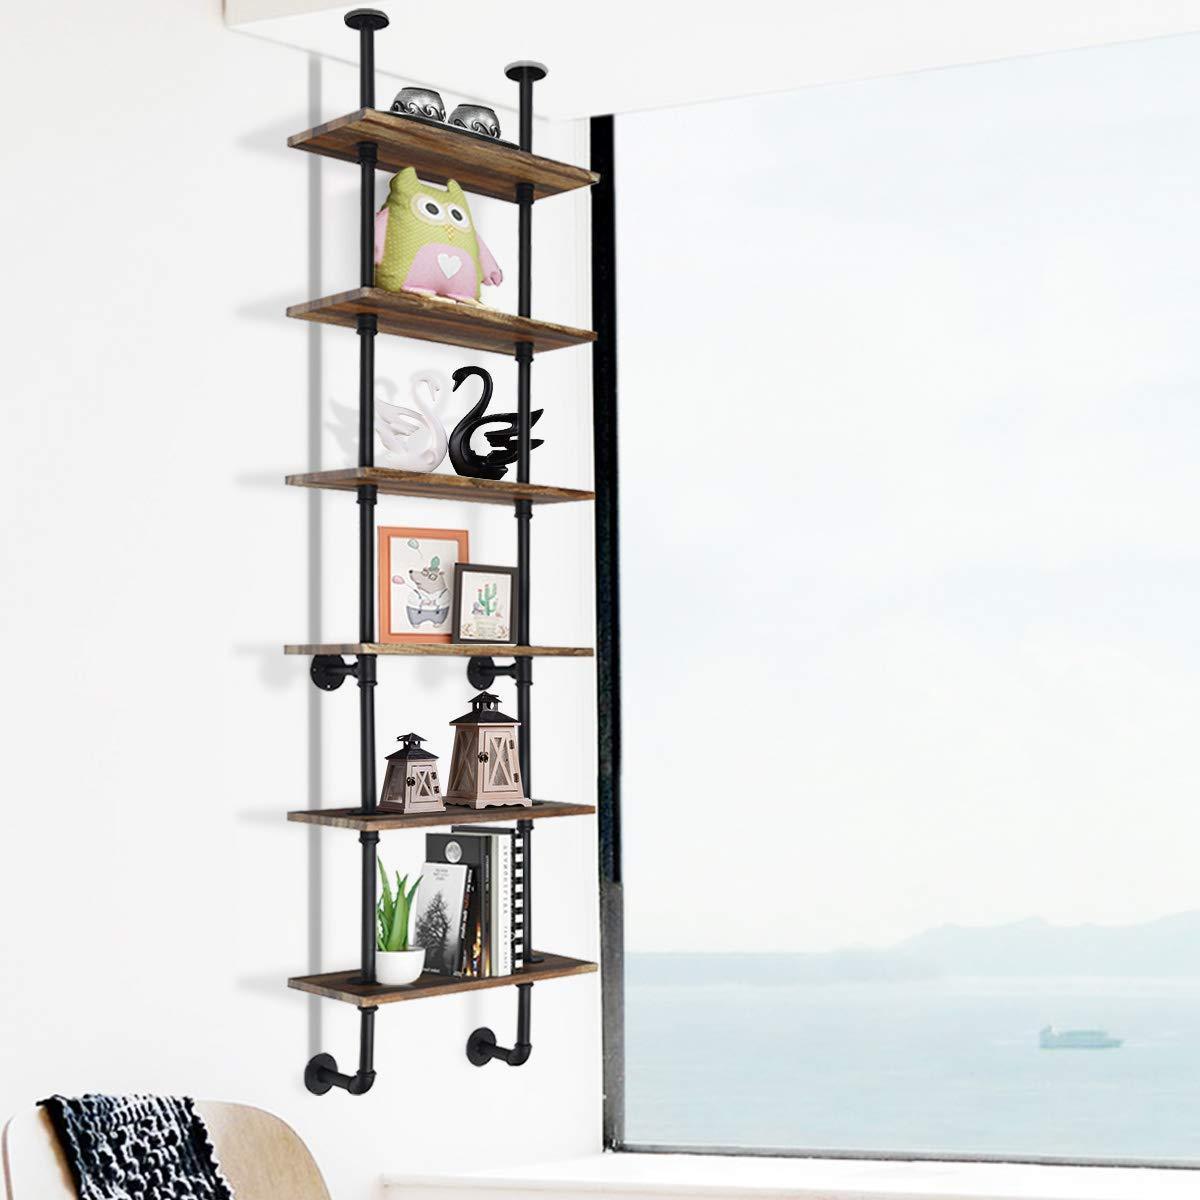 Shop giantex 6 tier industrial pipe shelves with wood rustic wall shelves vintage pipe wall shelf for bedrooms kitchens coffee shops or bar storage pickles wood grain